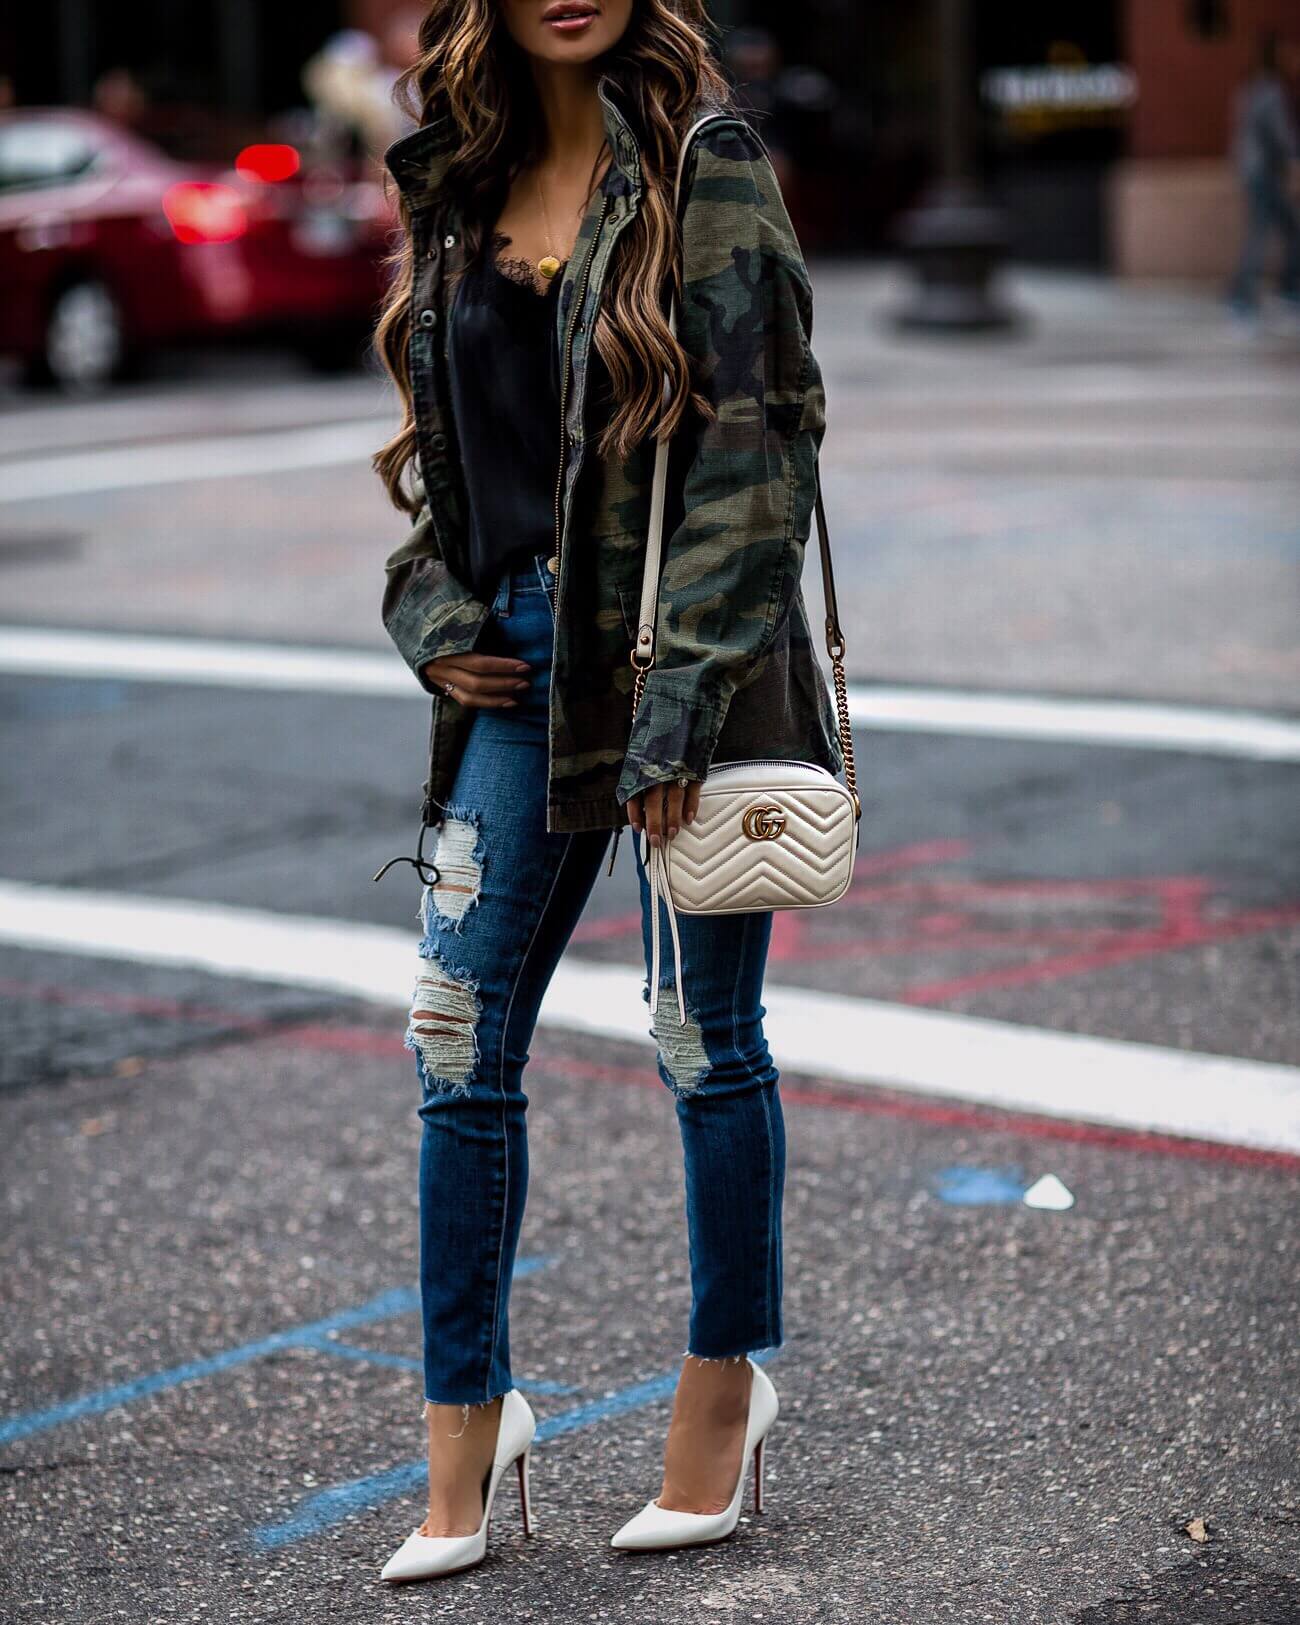 mia mia mine wearing distressed denim by l'agence and christian louboutin heels